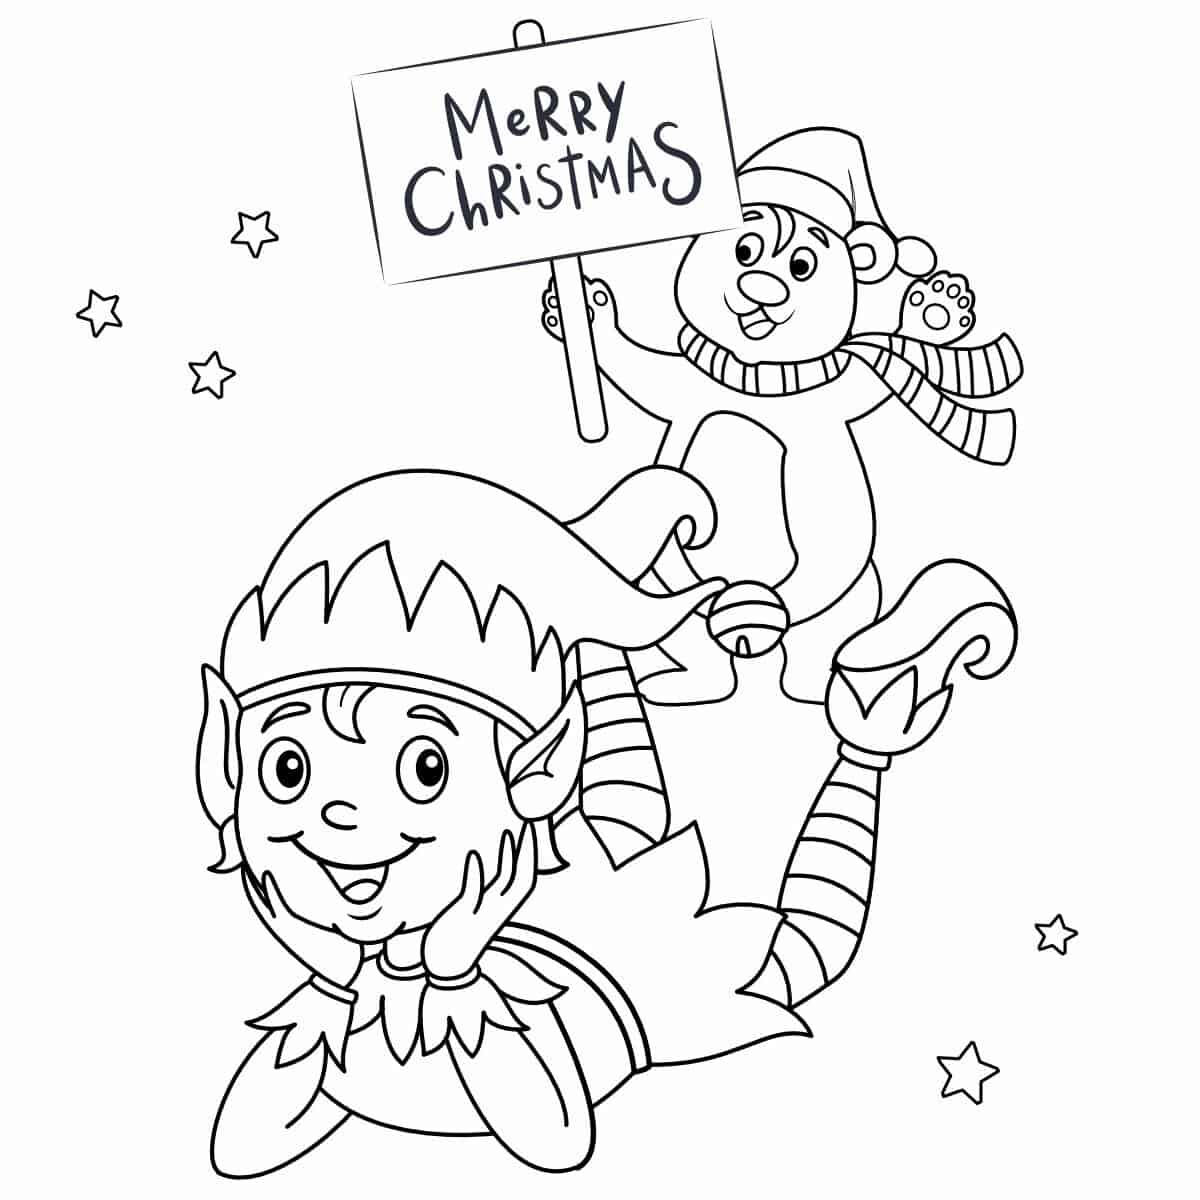 a line drawing of an elf with his head in his hands and a polar bear carrying a merry christmas sign